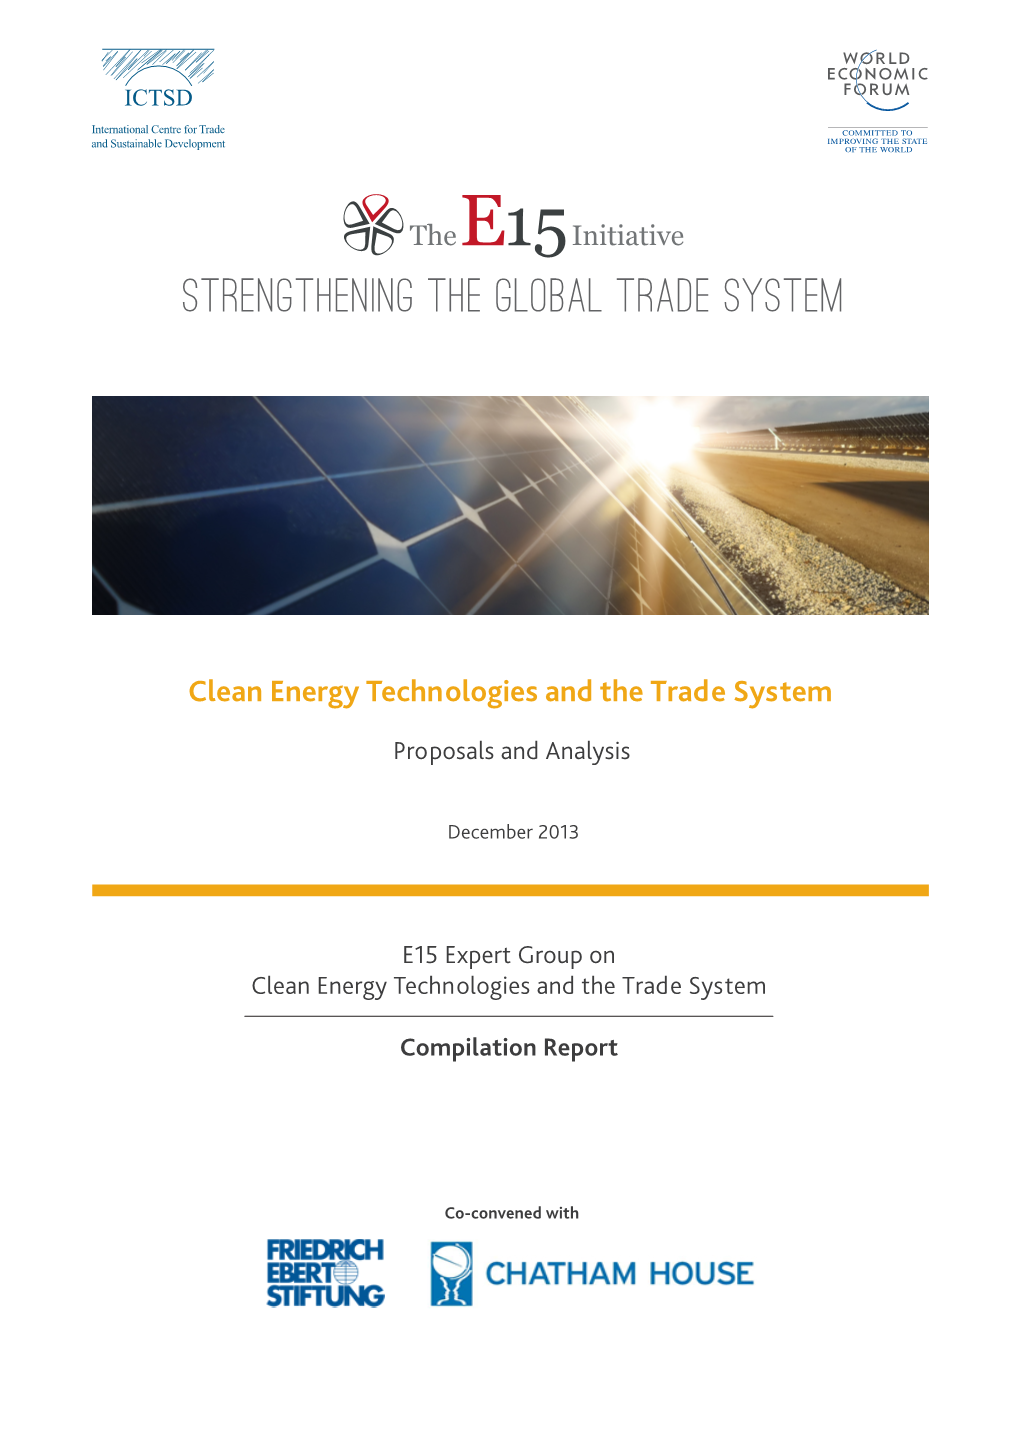 Clean Energy Technologies and the Trade System